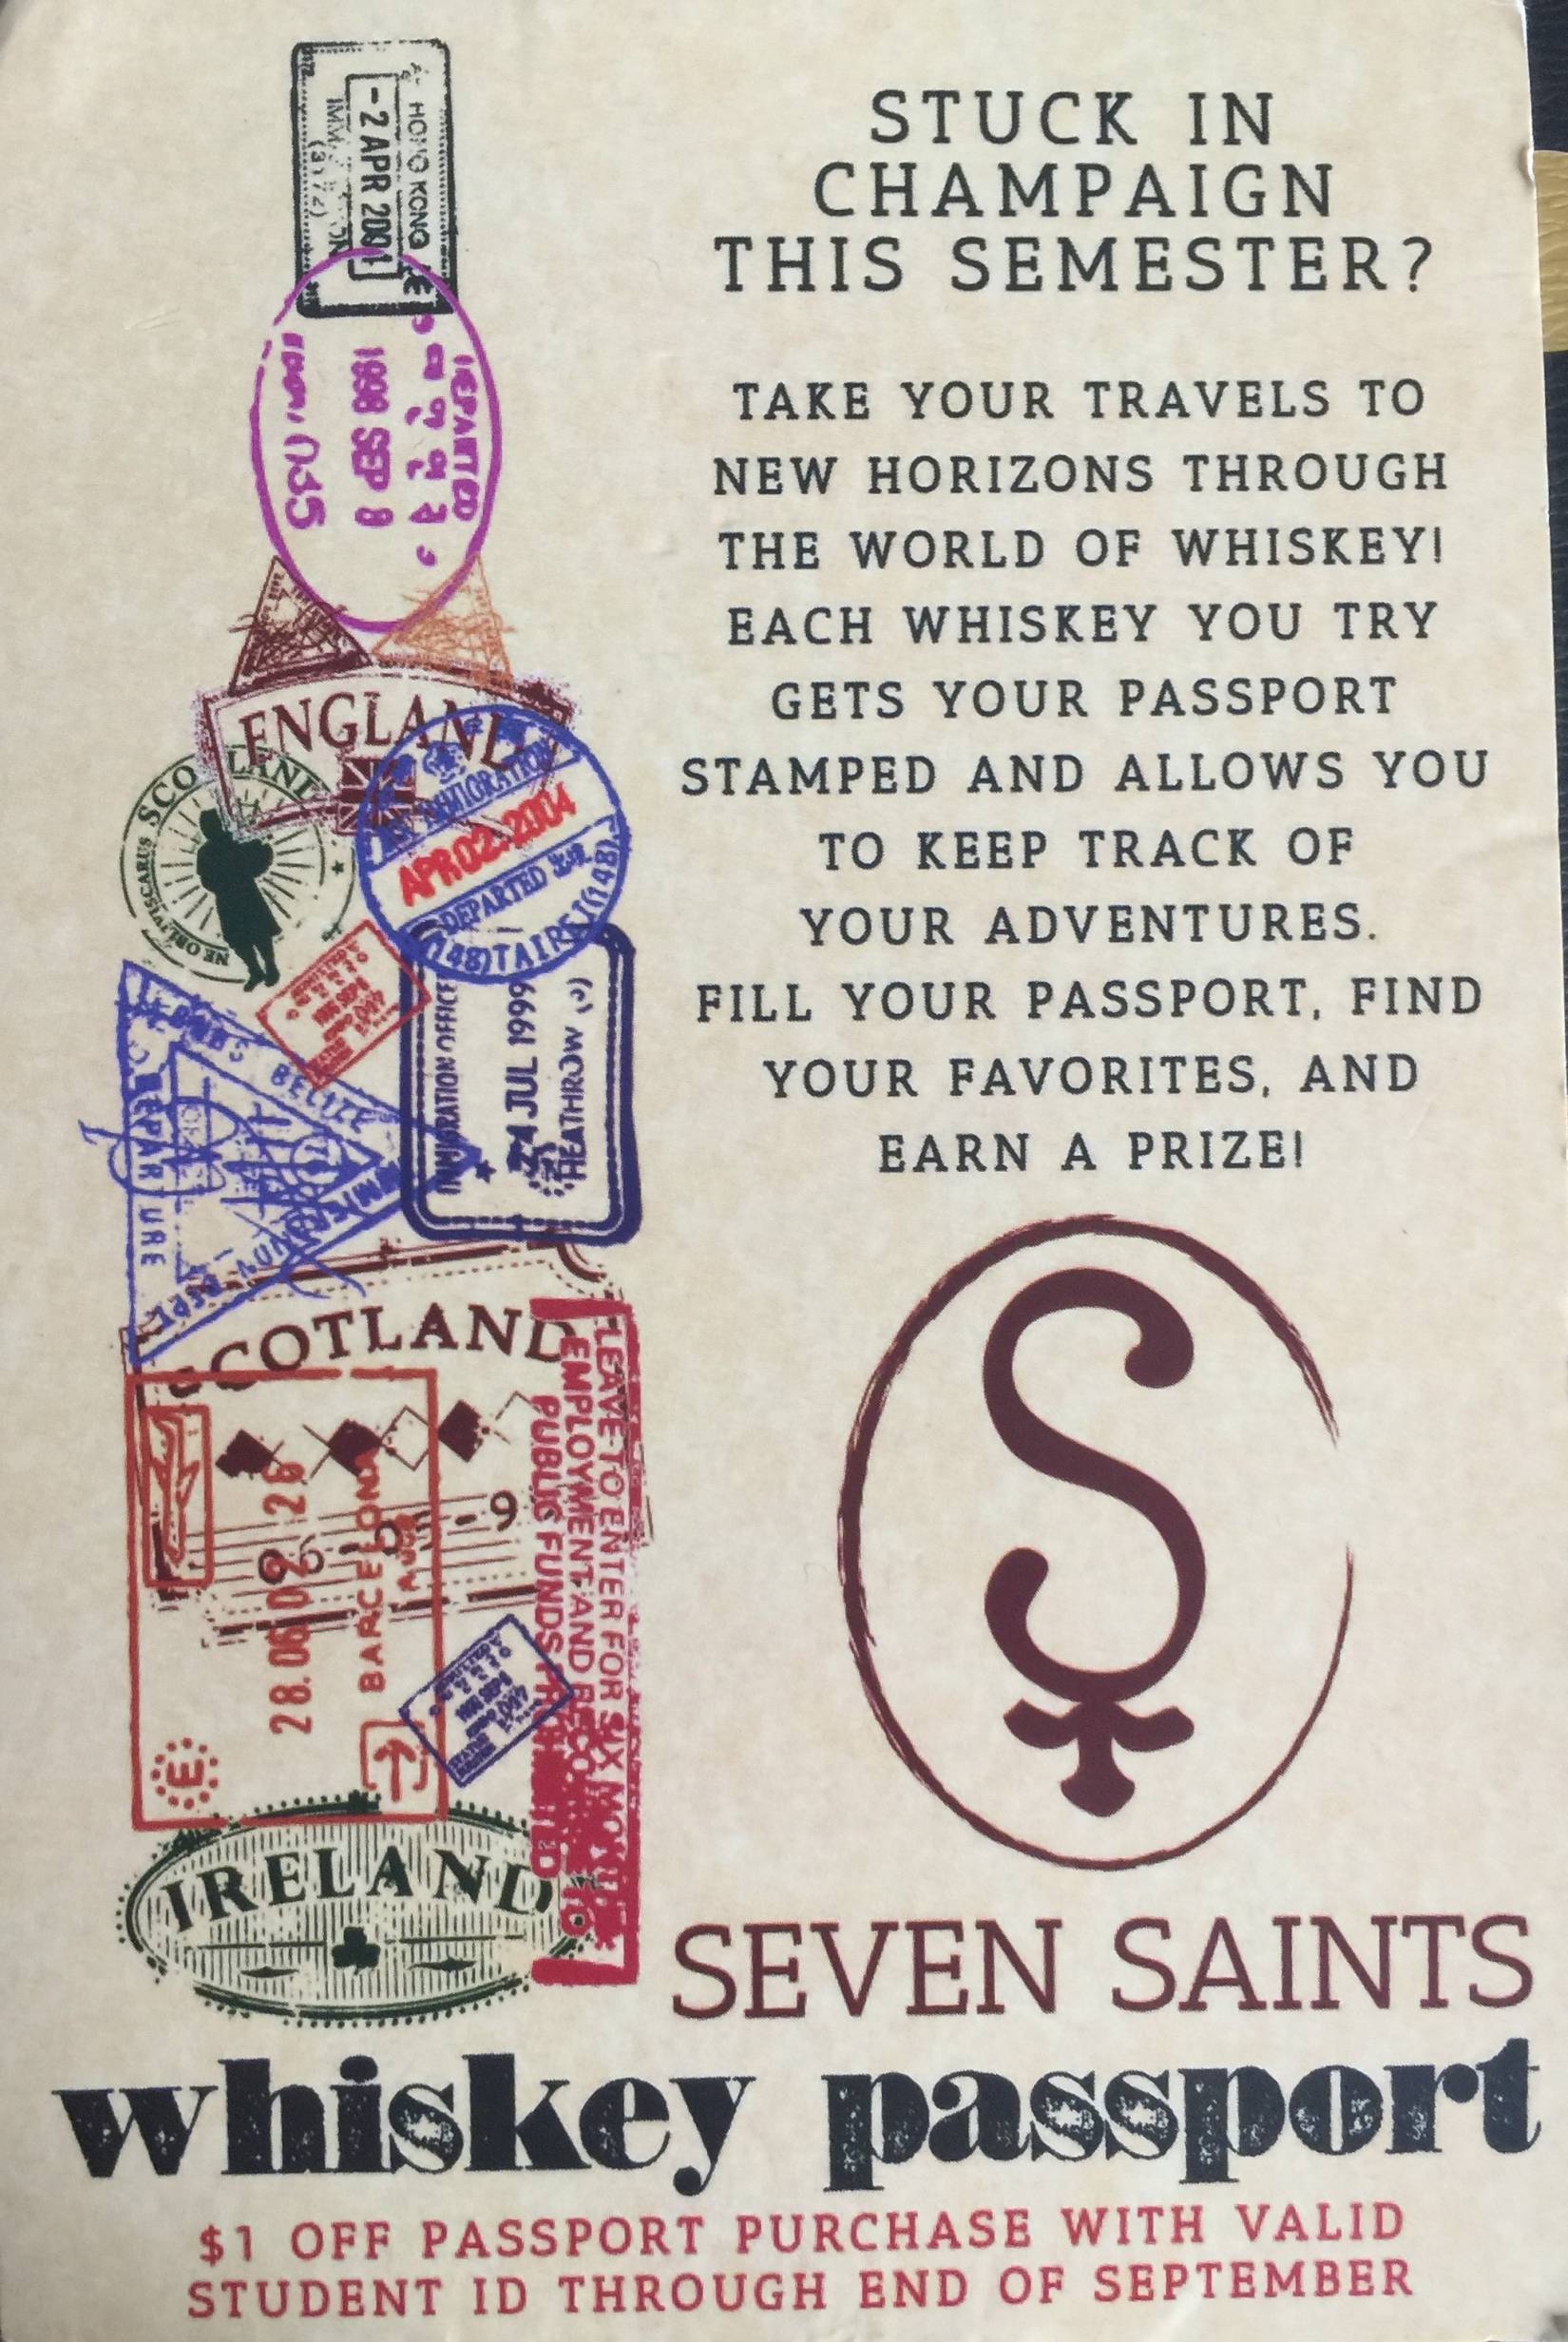 Seven Saints offering Whiskey Passport for students (of age, of course) this month